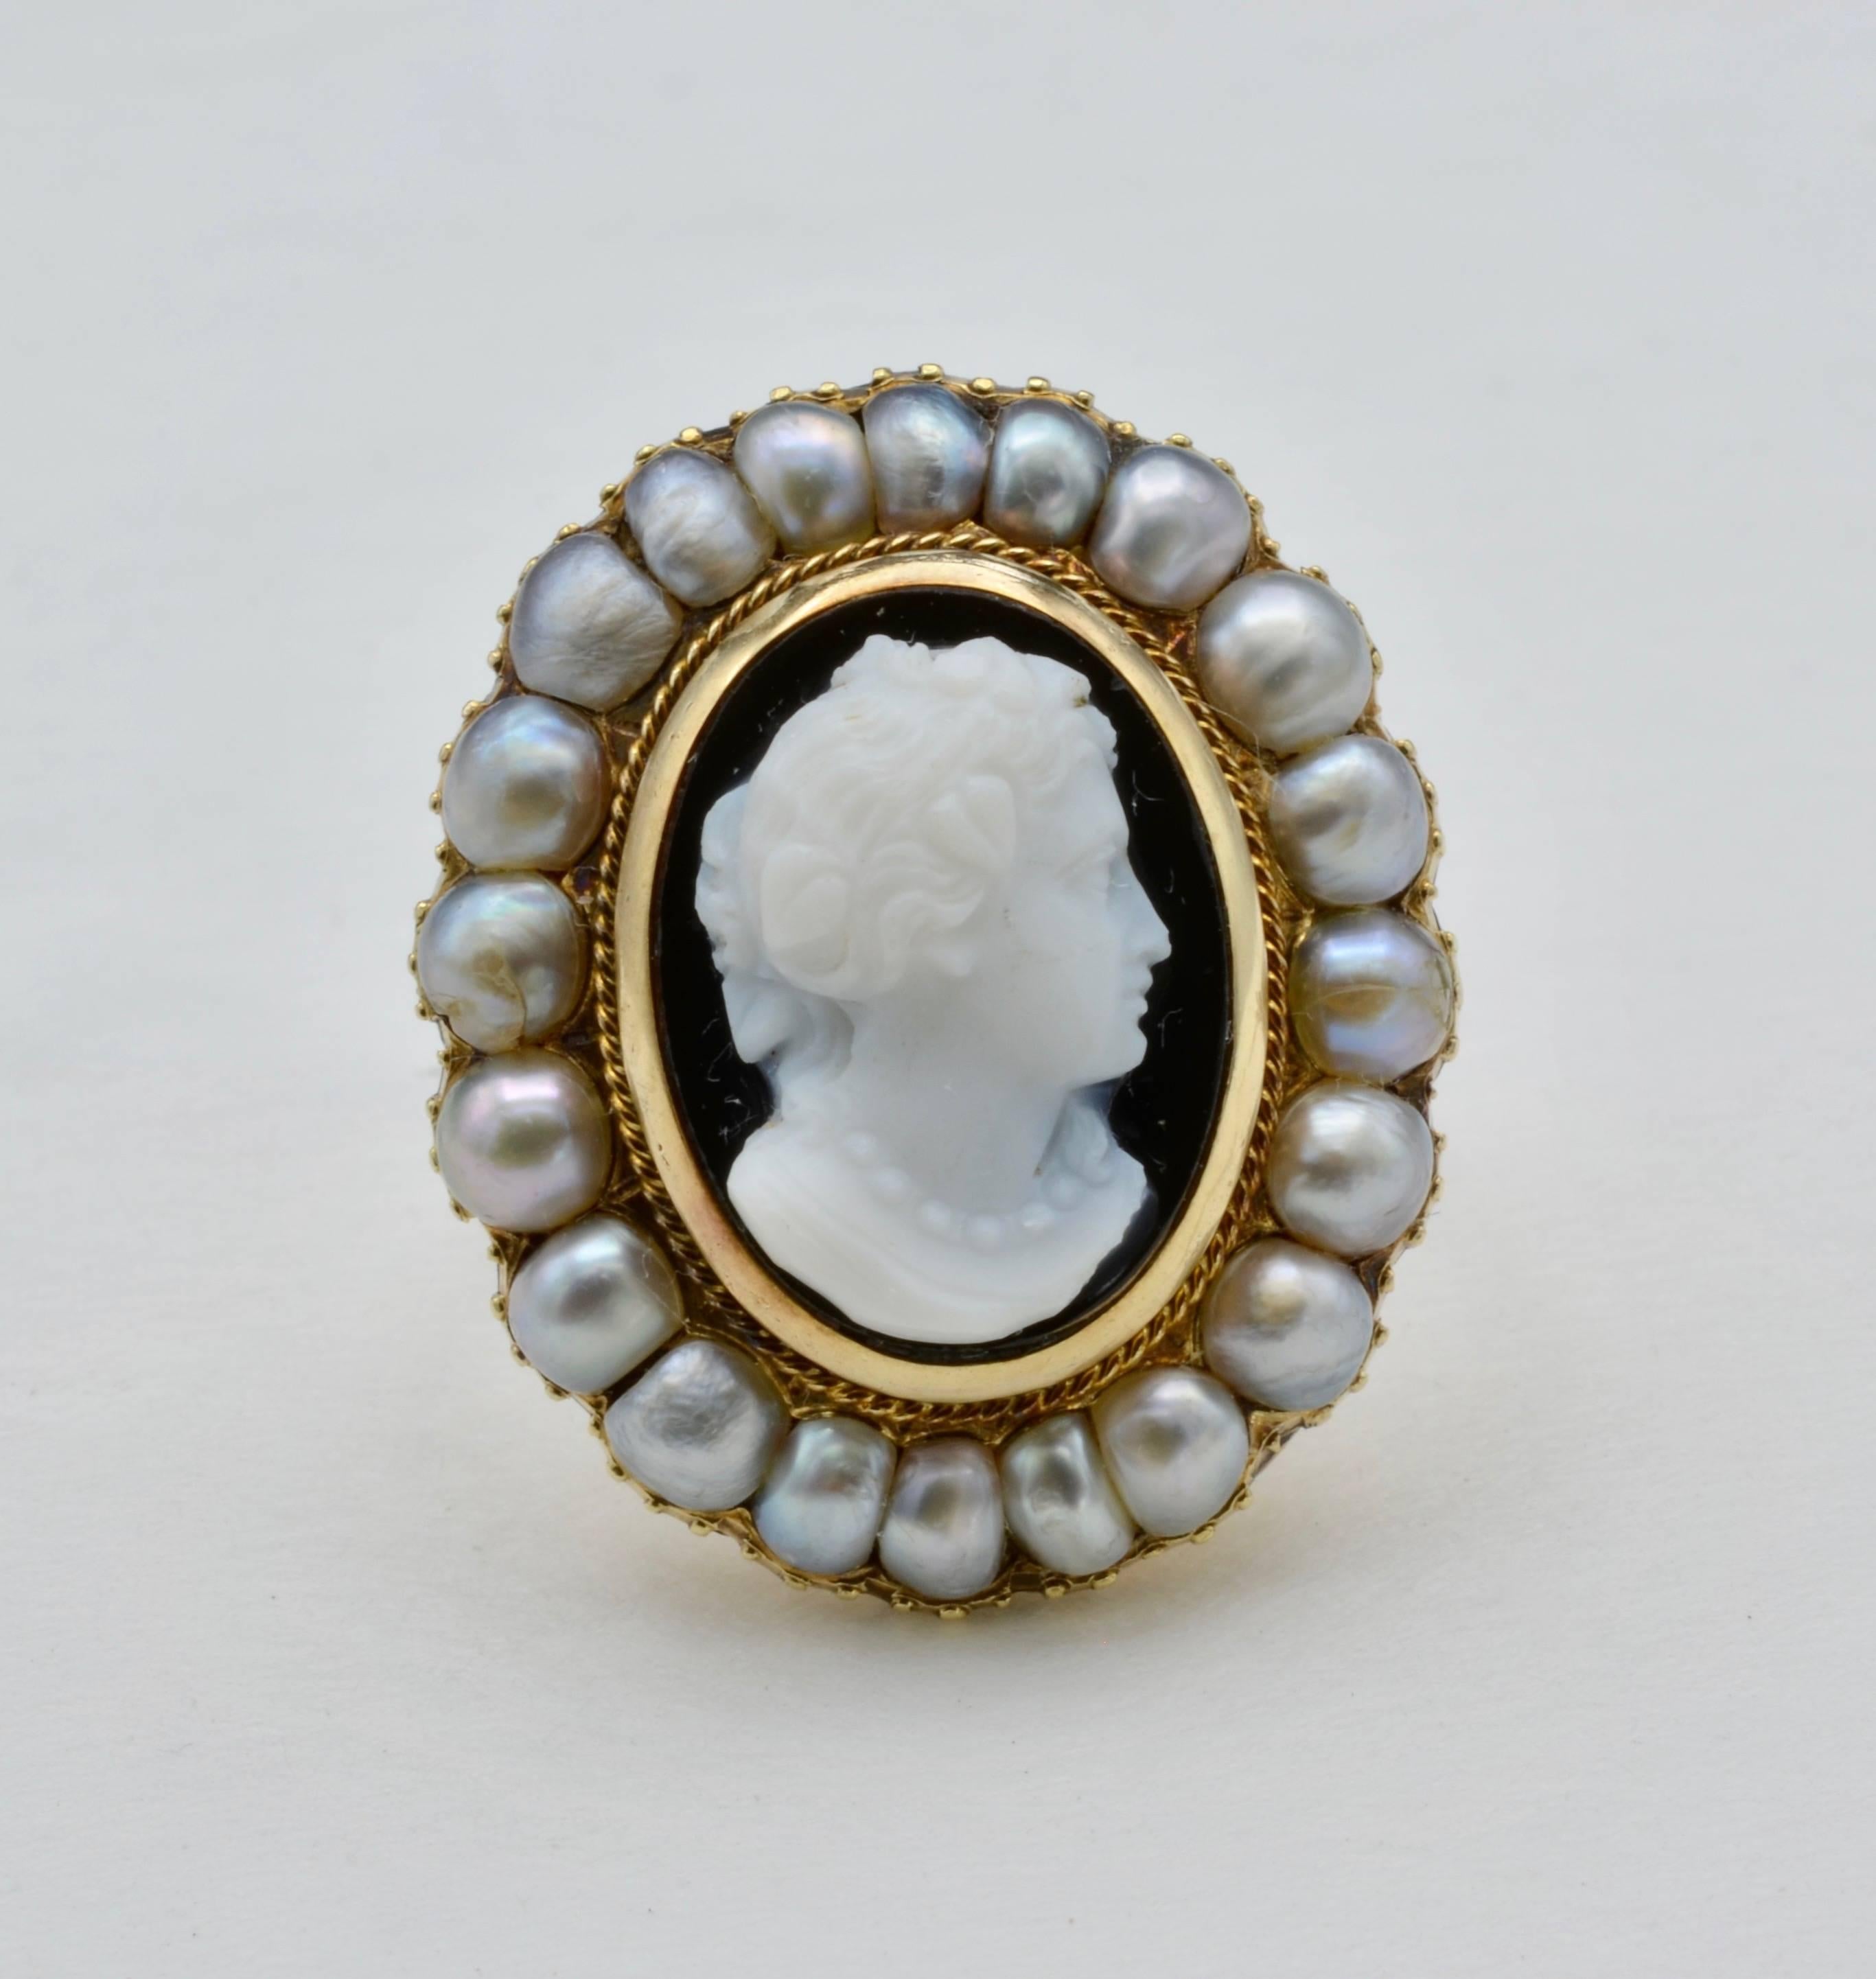 From the 1880's this hand carved onyx ring is set with a halo of fine natural pearls in 18K yellow gold. A beautiful profile portrait and size 3.75 may be sized. The 20 pearls are between 2.5-3 mm in width.